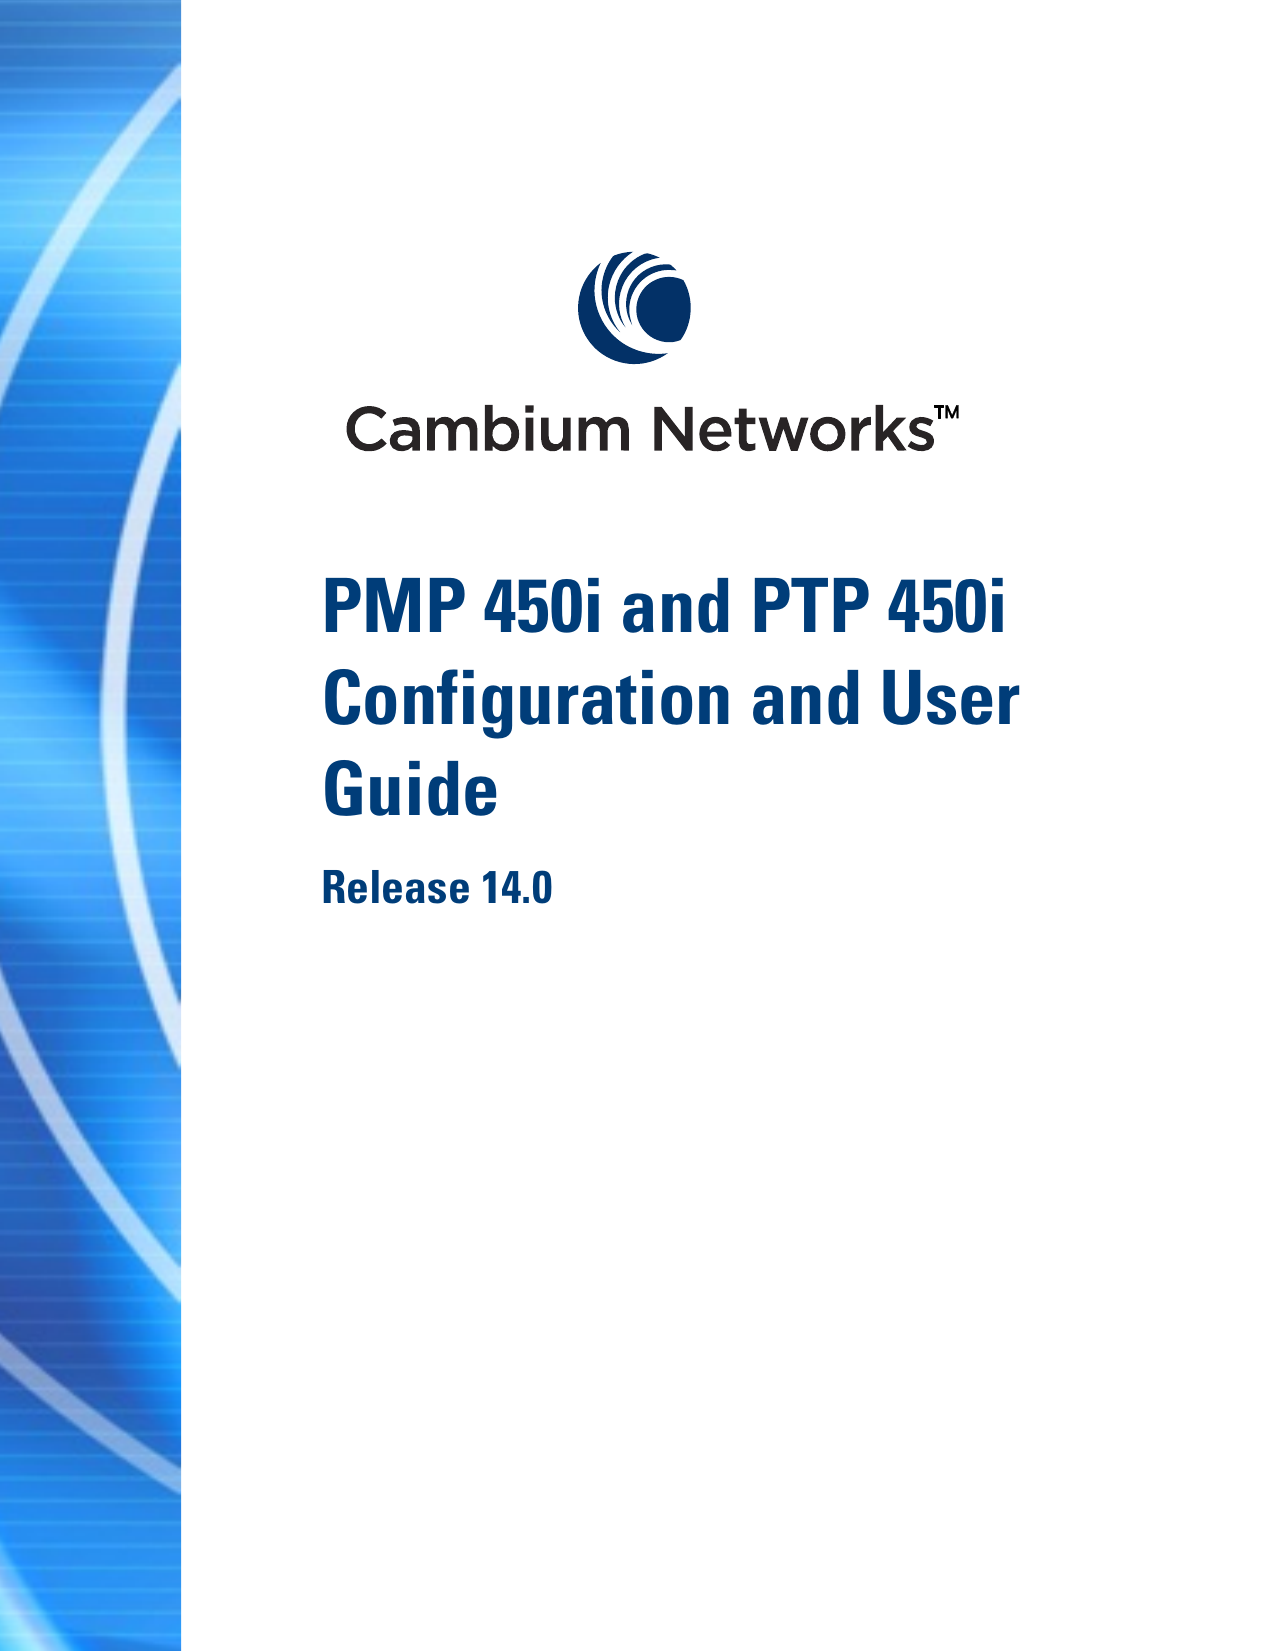      PMP 450i and PTP 450i Configuration and User Guide Release 14.0                    